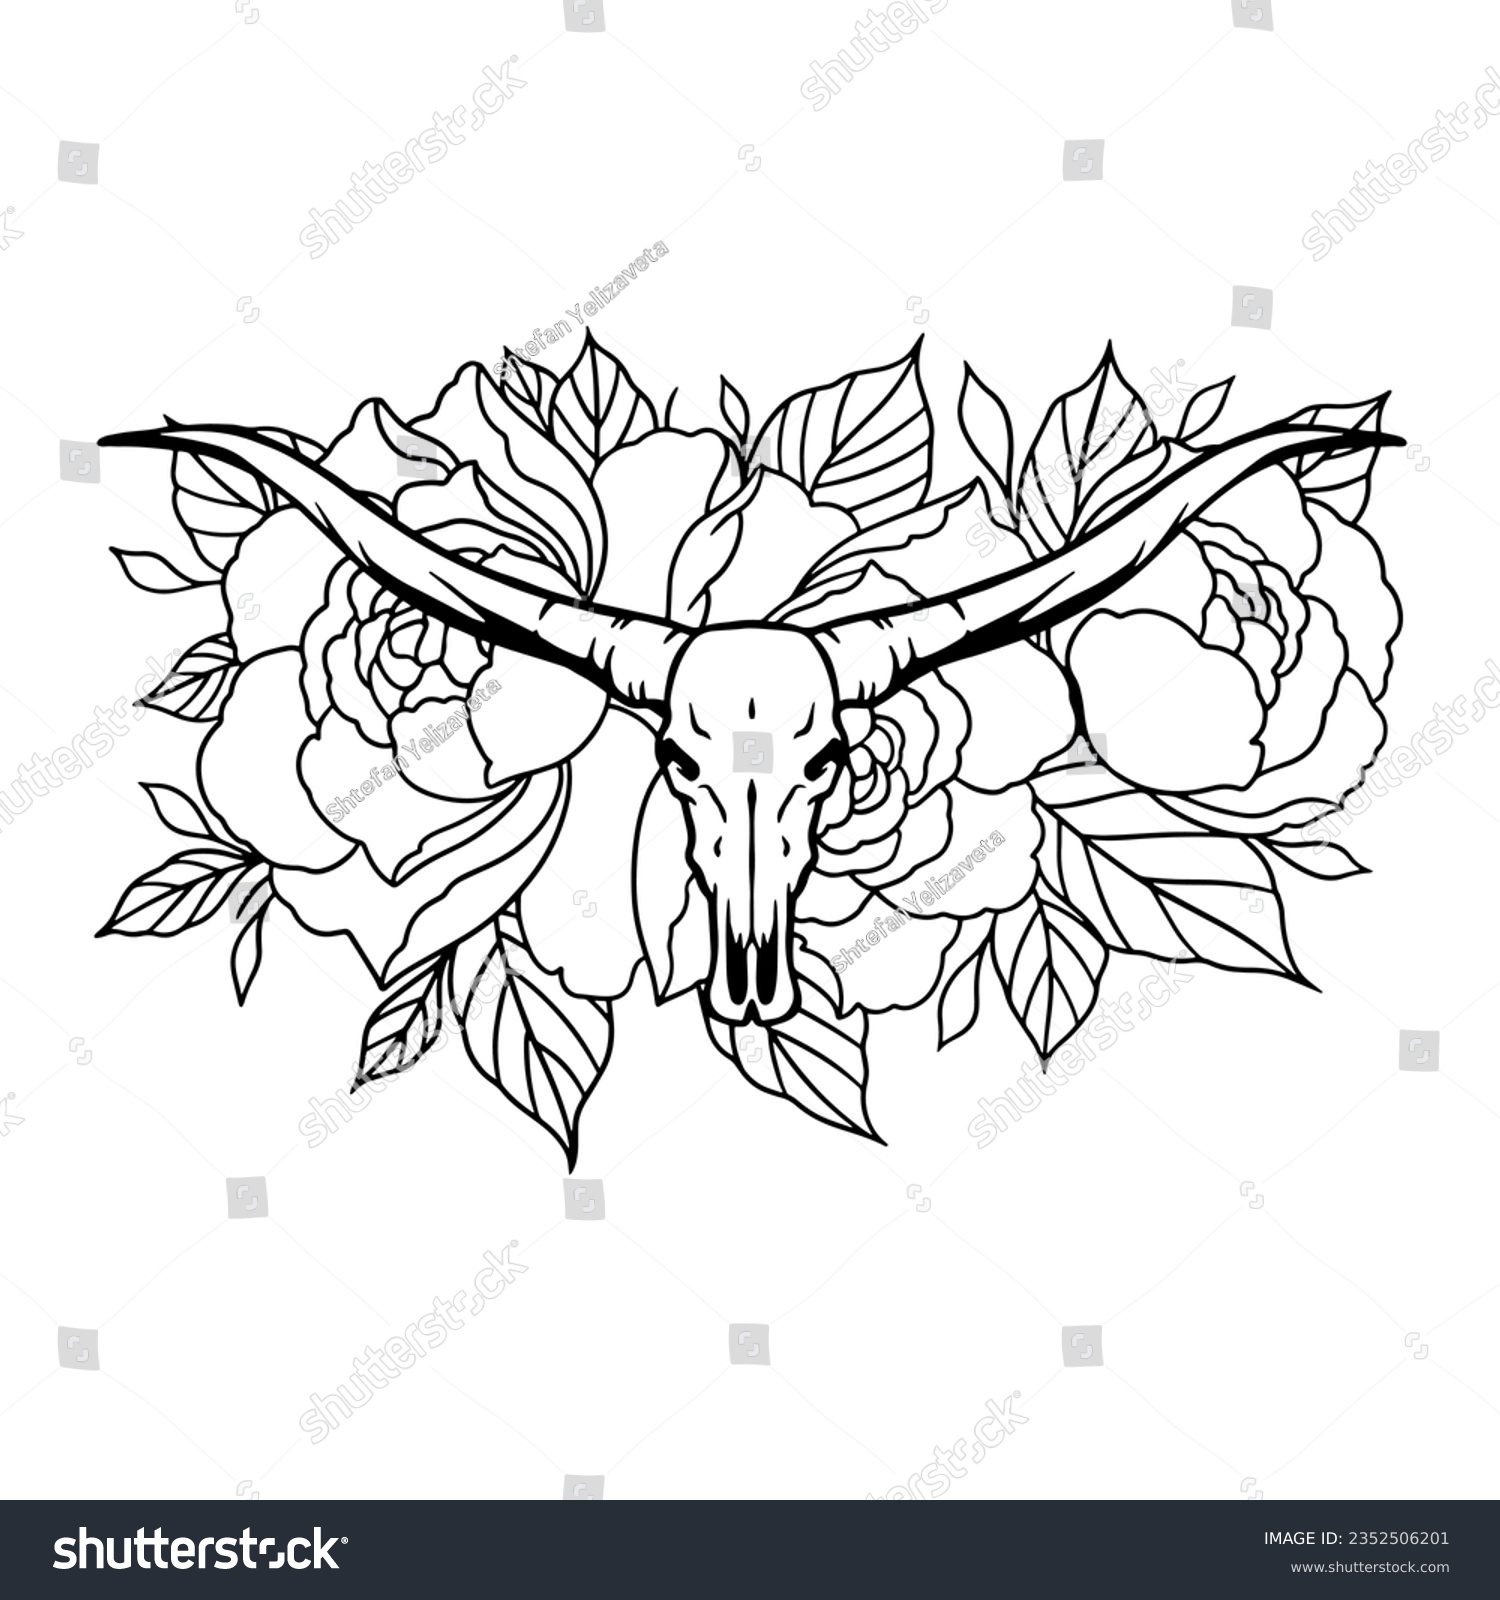 SVG of Texas longhorn black and white vector illustration. Longhorn skull with flowers, clipart. Silhouette Texas Longhorn. Bull Head Logo Icon. Hand drawn svg